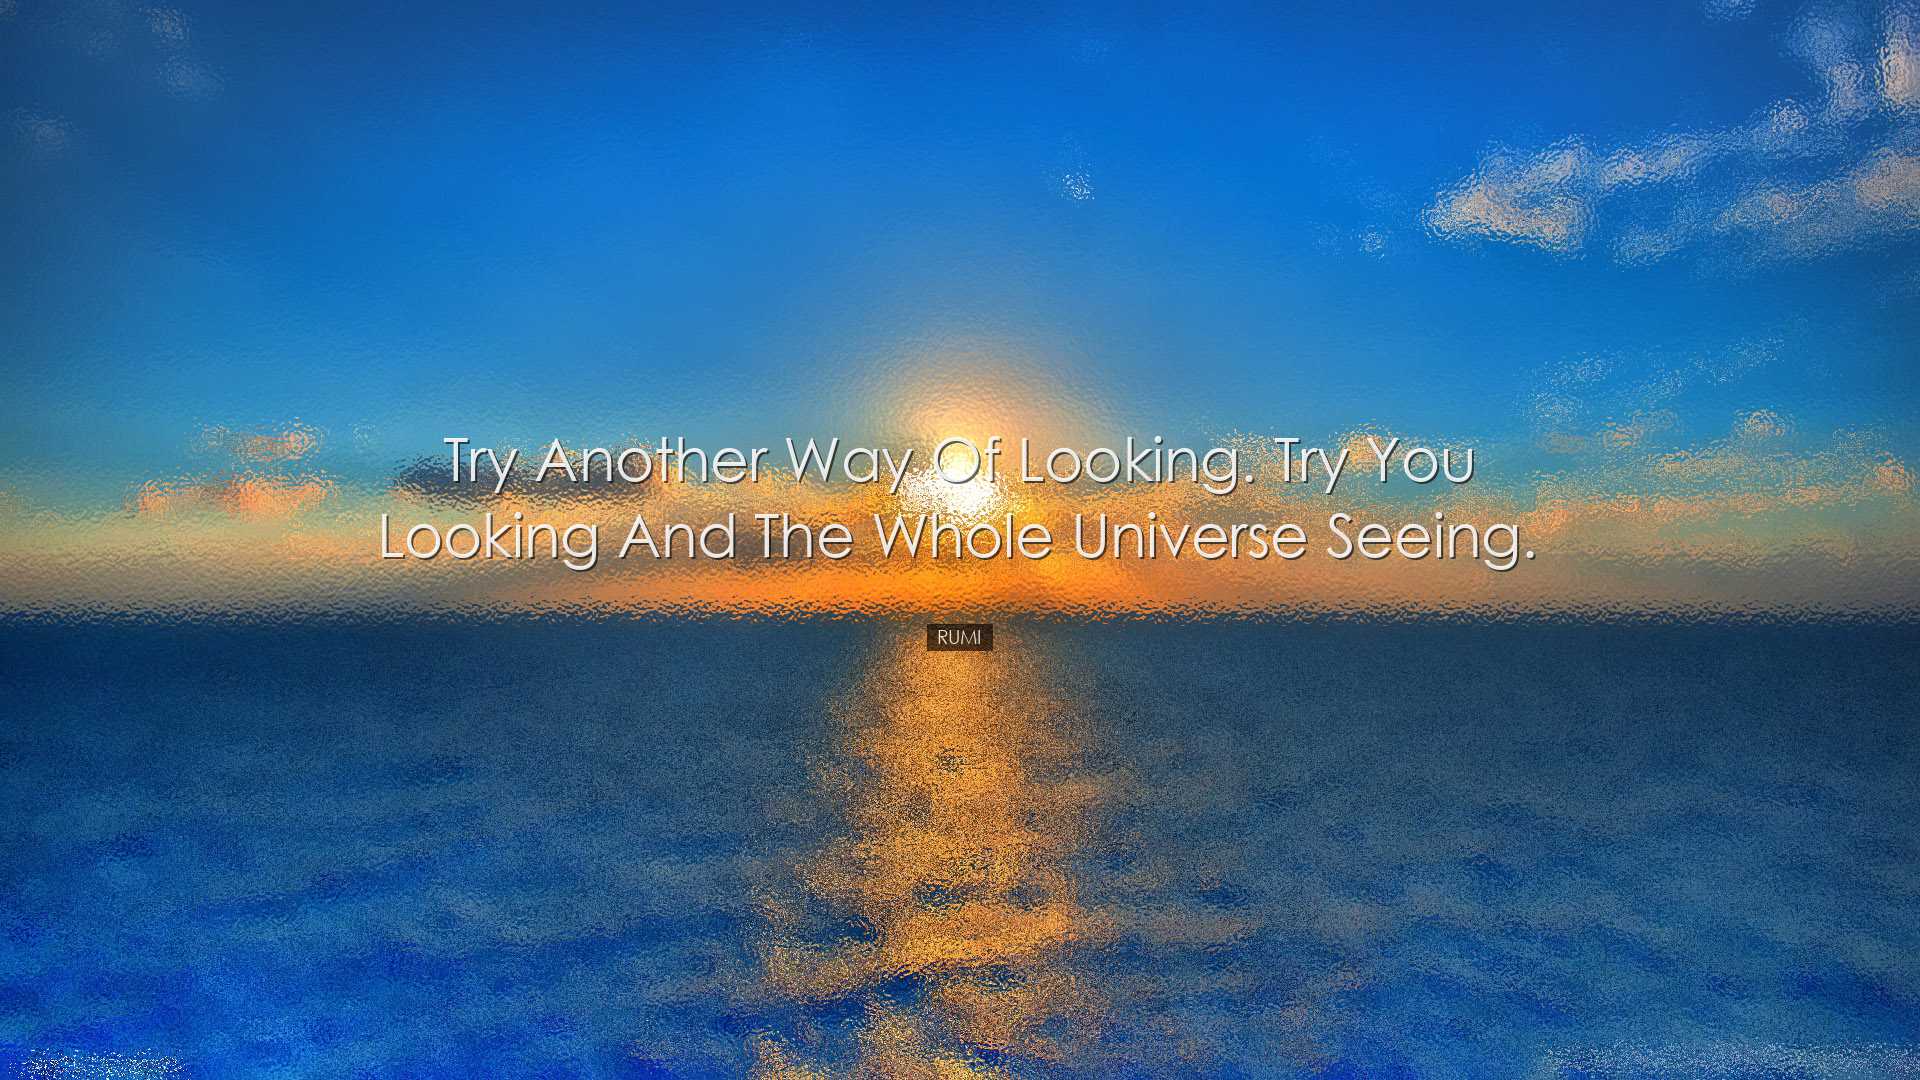 Try another way of looking. Try you looking and the whole universe